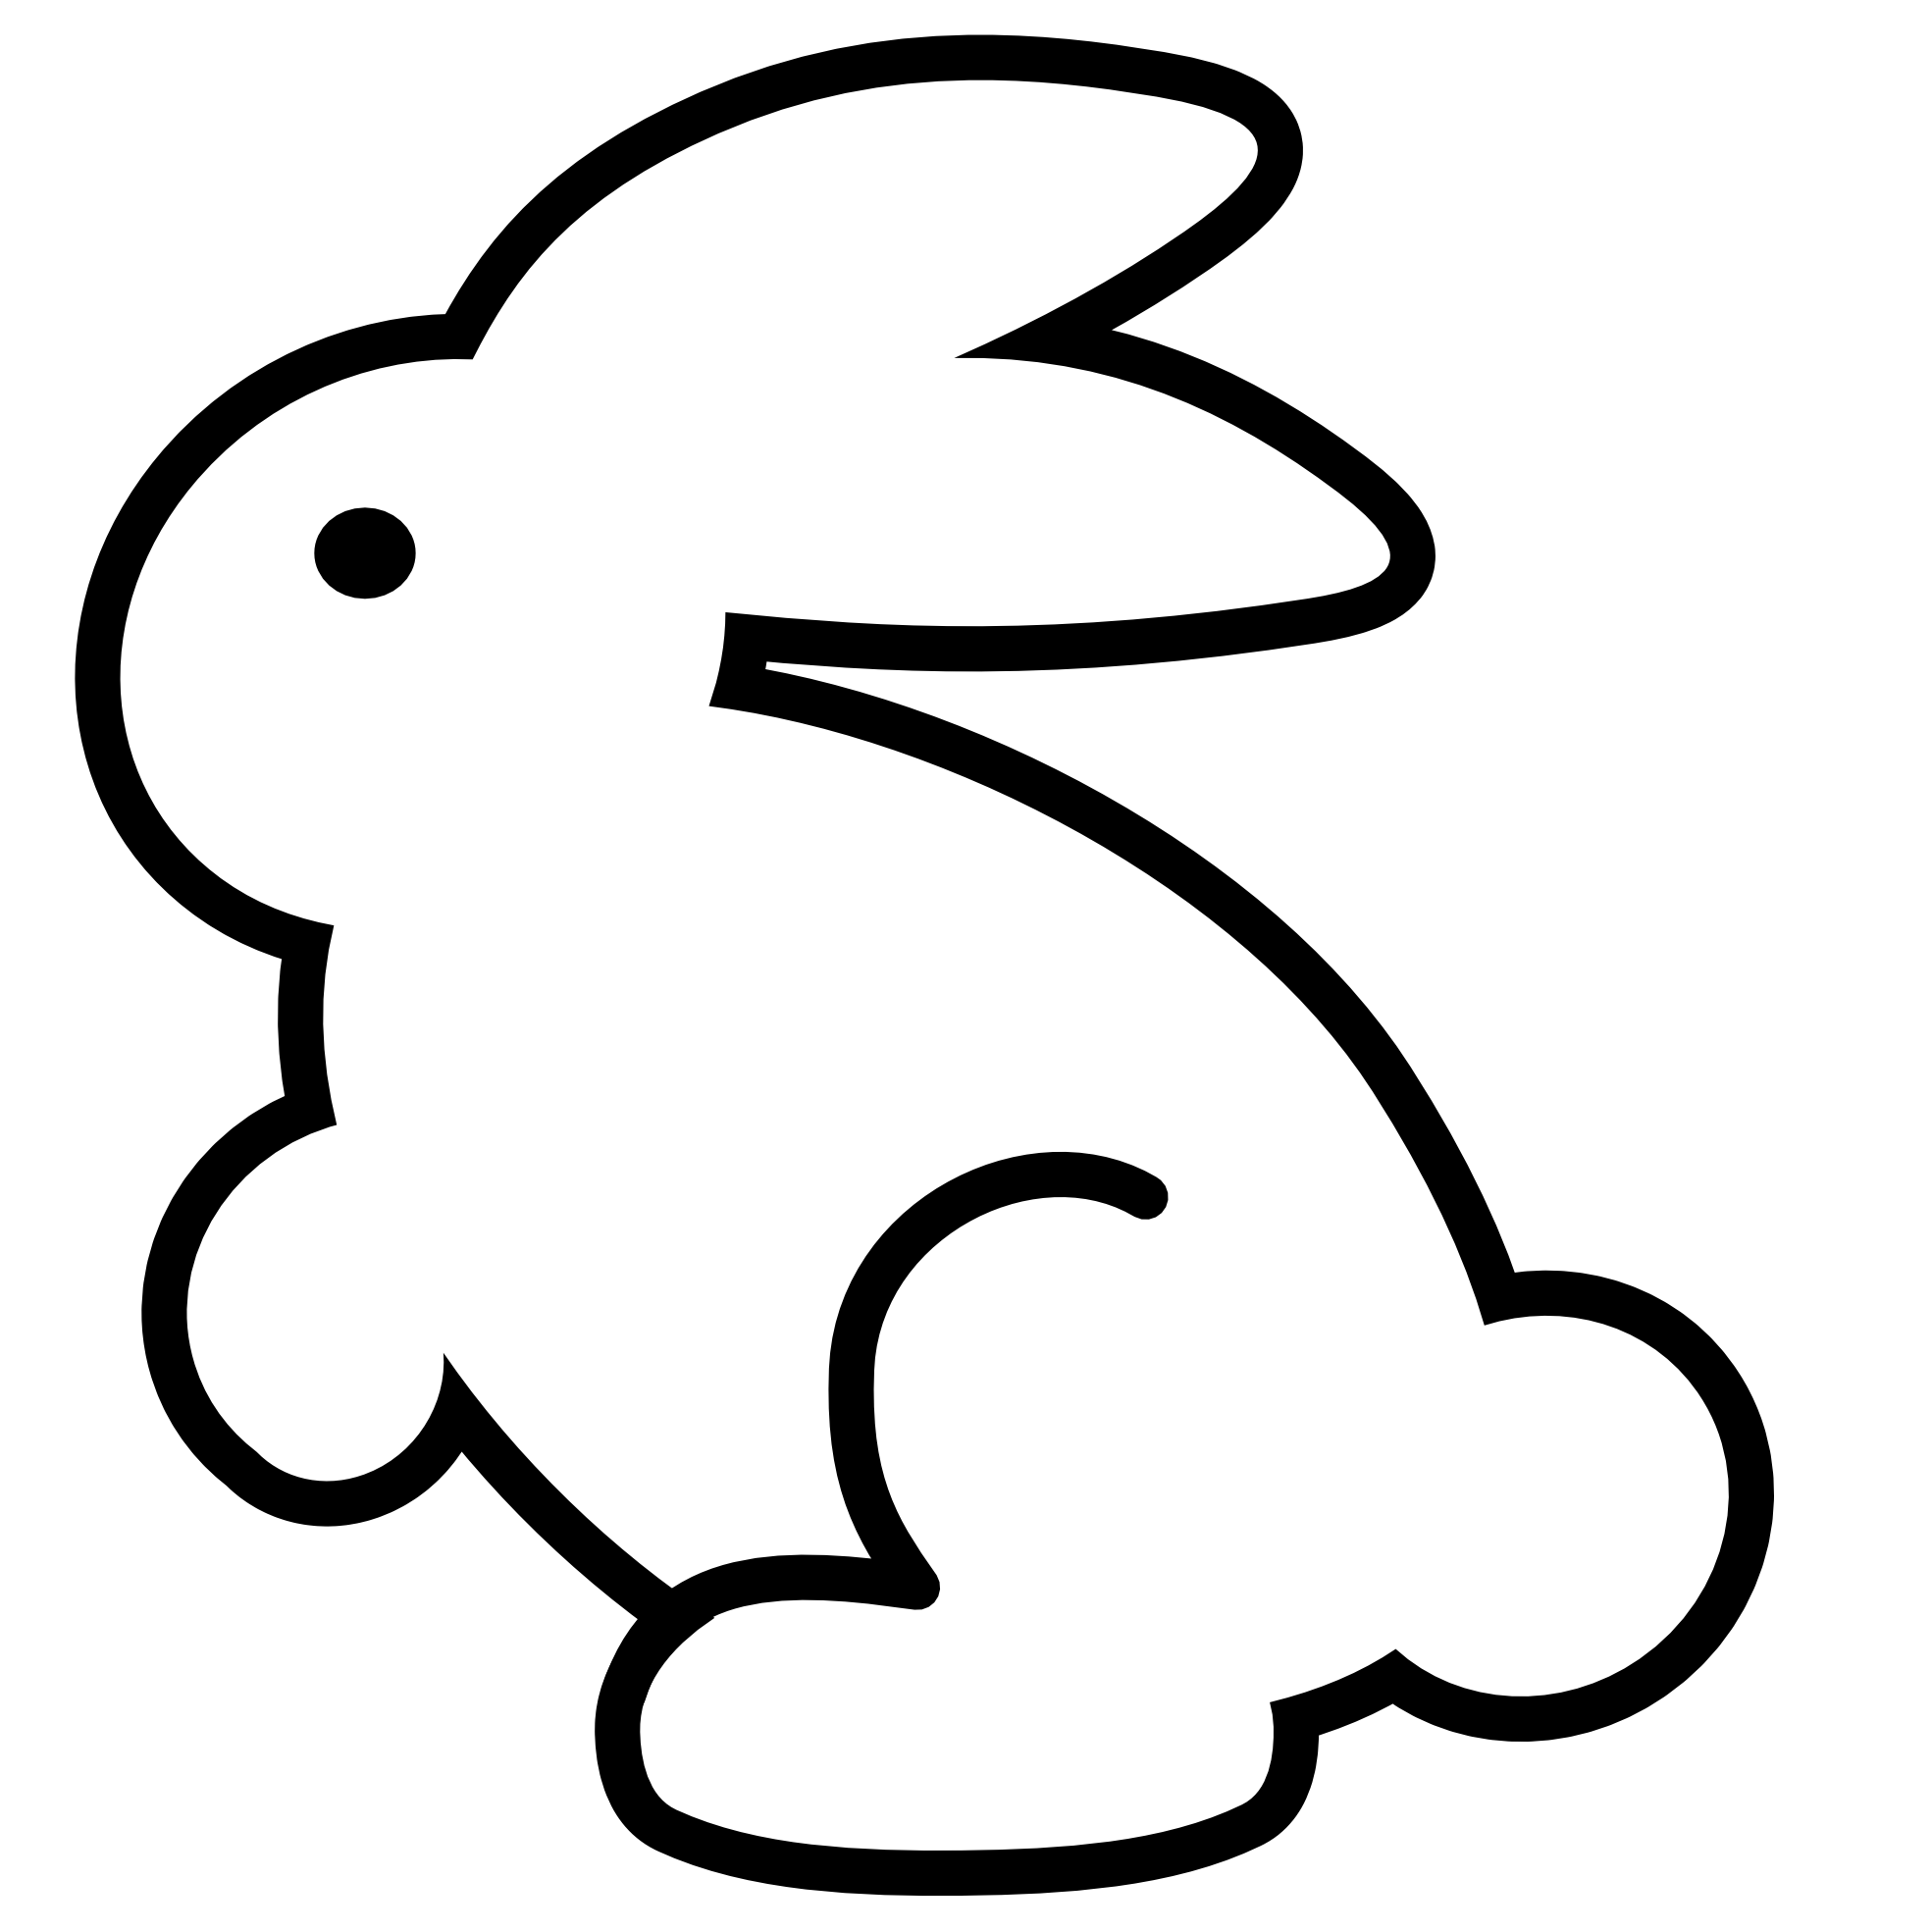 Quilt clipart outline. Bunny black and white